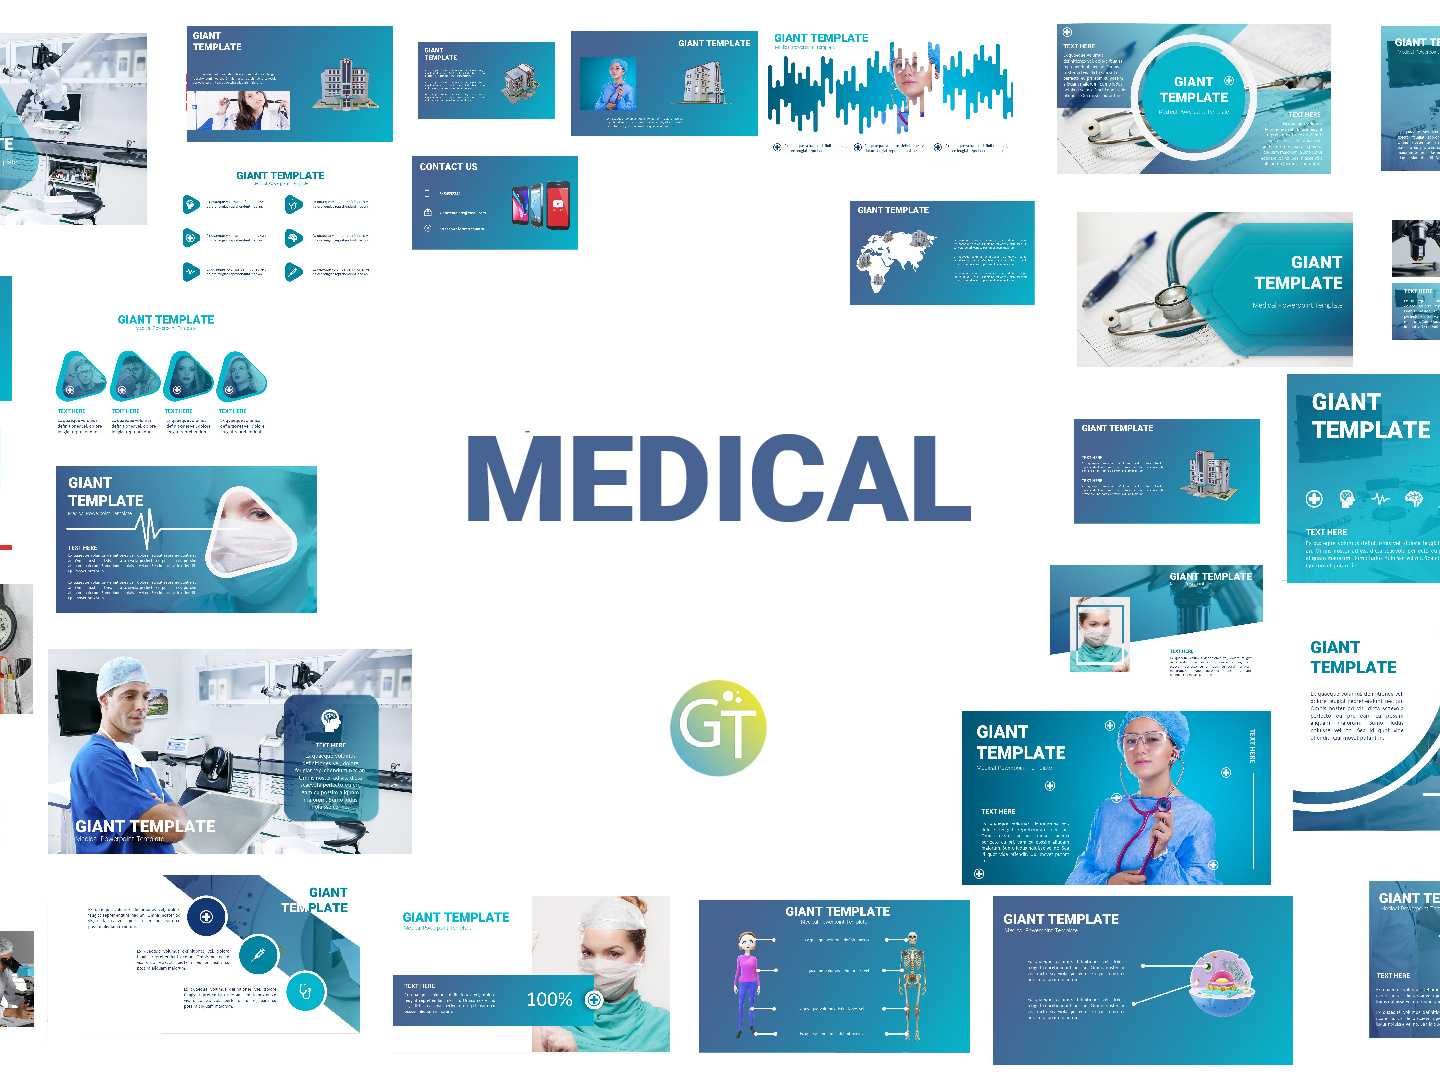 Medical Powerpoint Templates Free Downloadgiant Template In Powerpoint Sample Templates Free Download